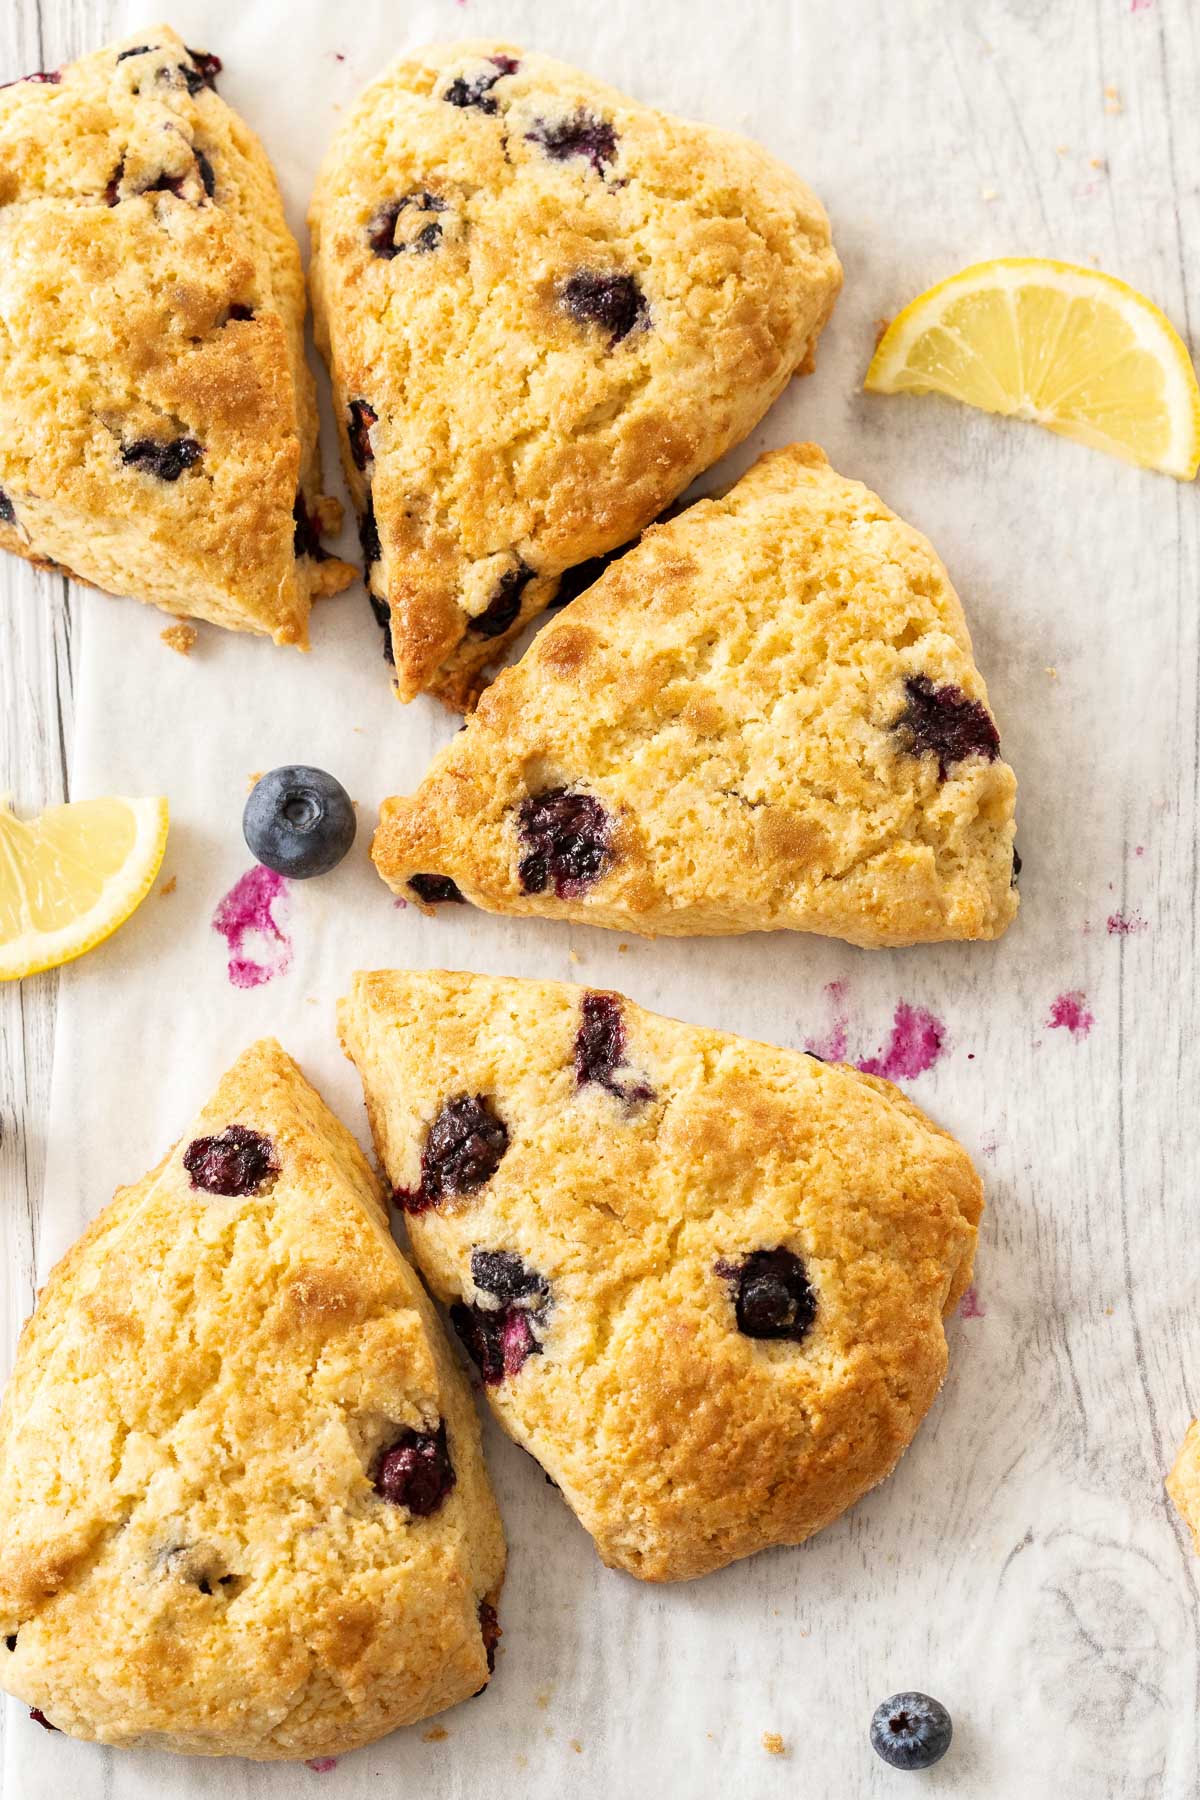 A semi circle made up of several bakery style lemon and blueberry scones.